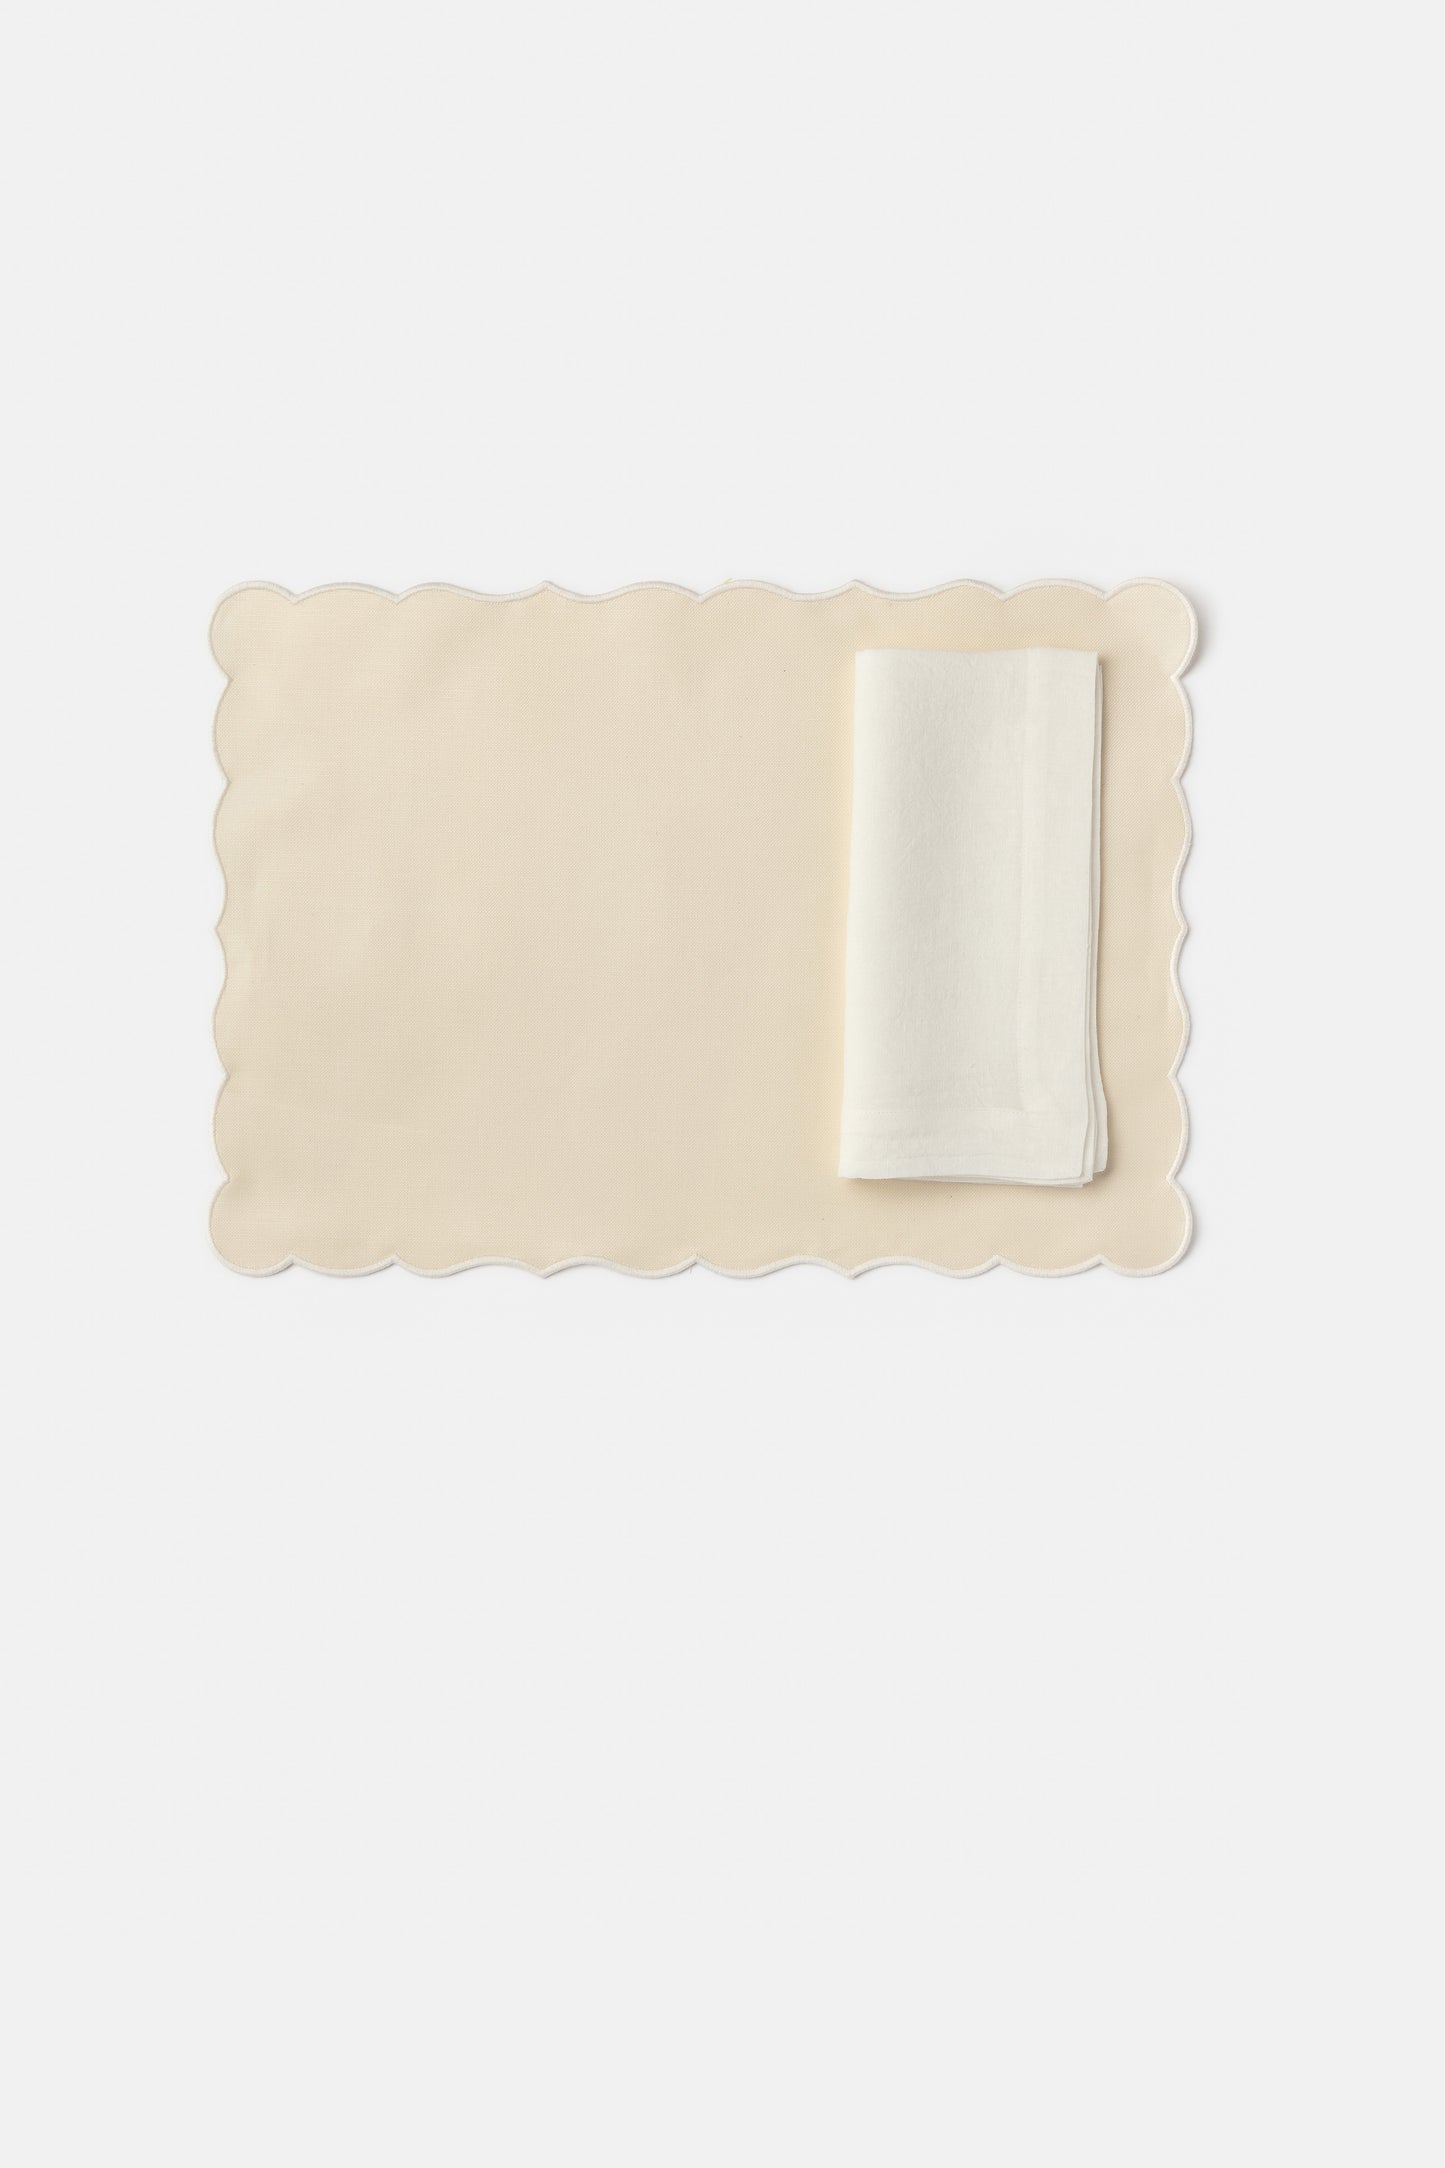 "Lido" placemat in Ivory / White